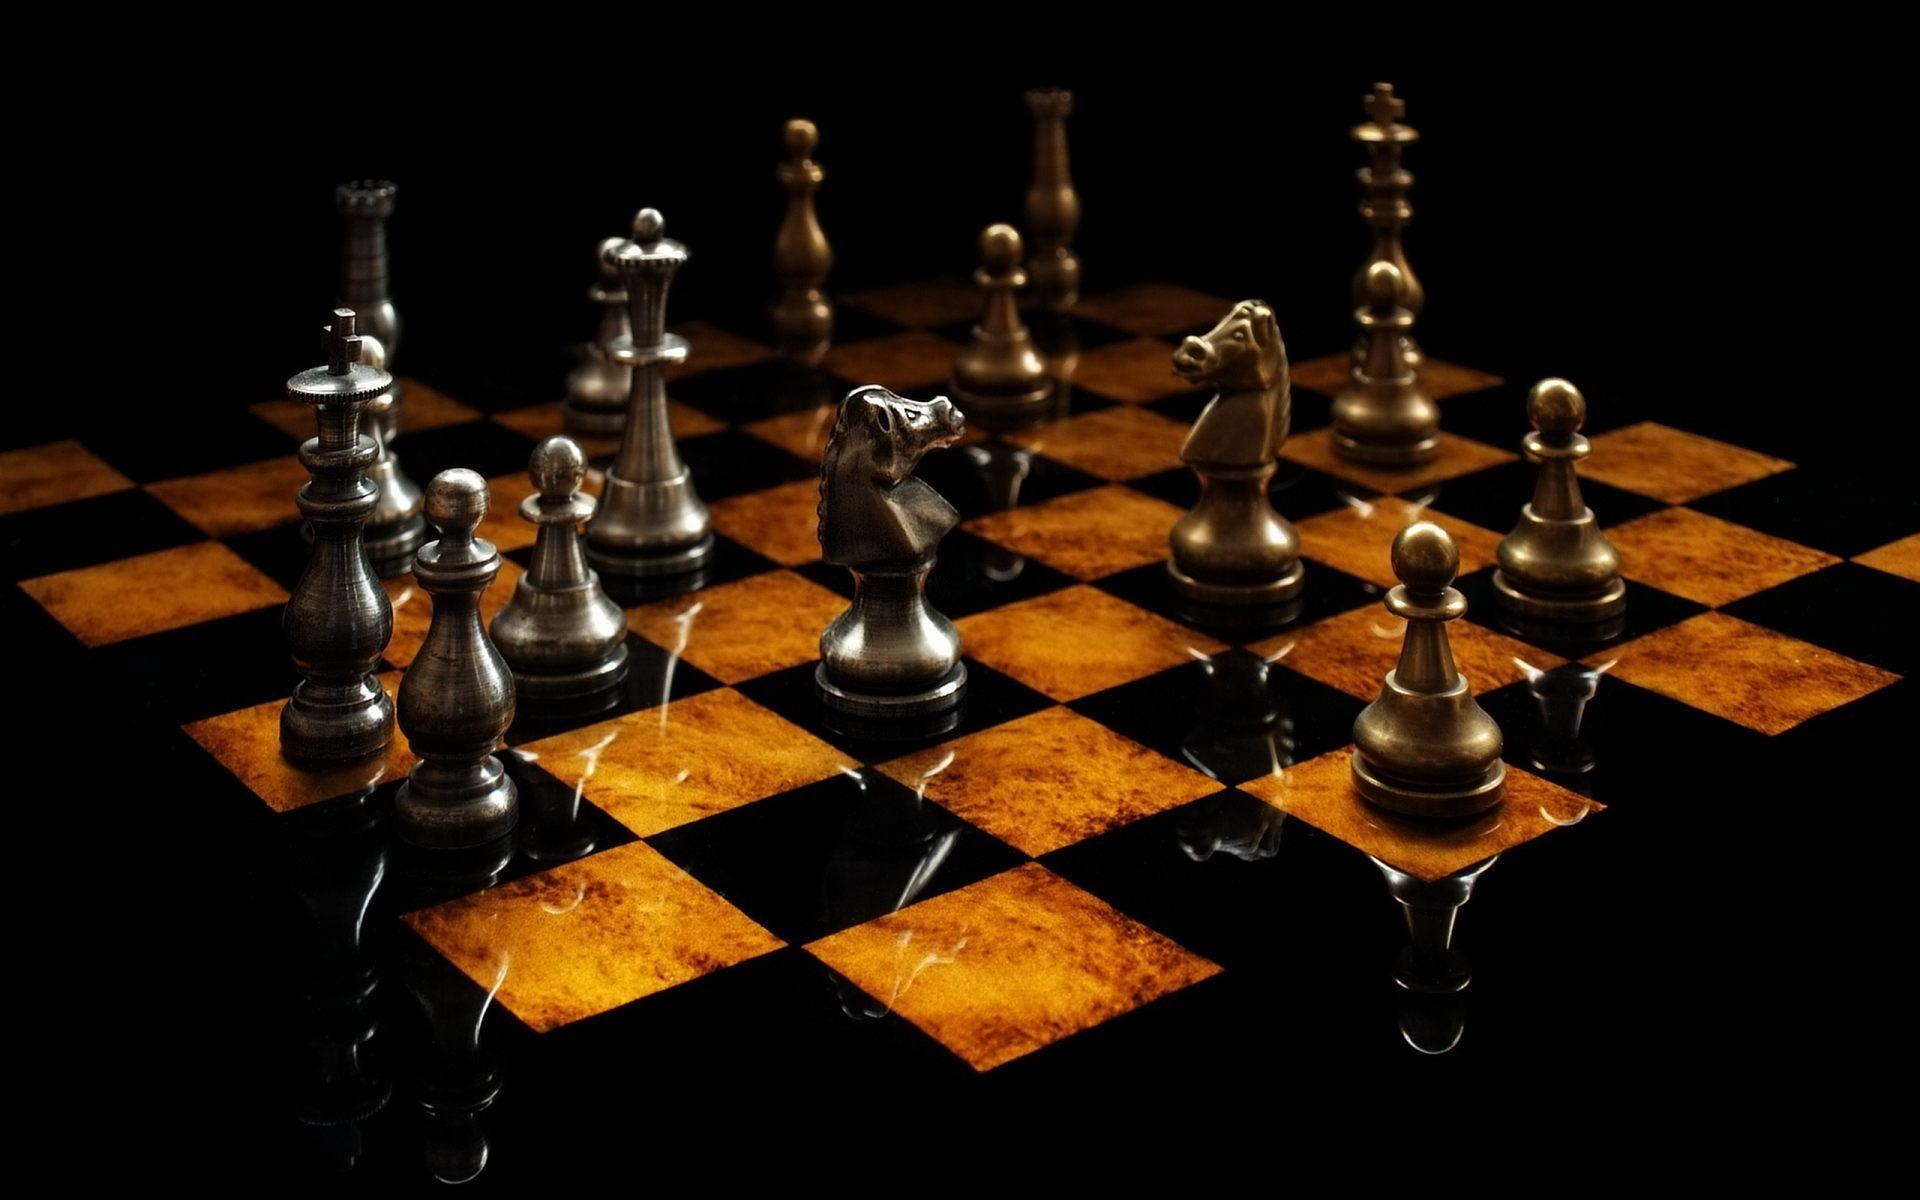 3D Chess Game Picture HD Wallpaper For Your PC Desktop. Chess board, Chess, Chess game